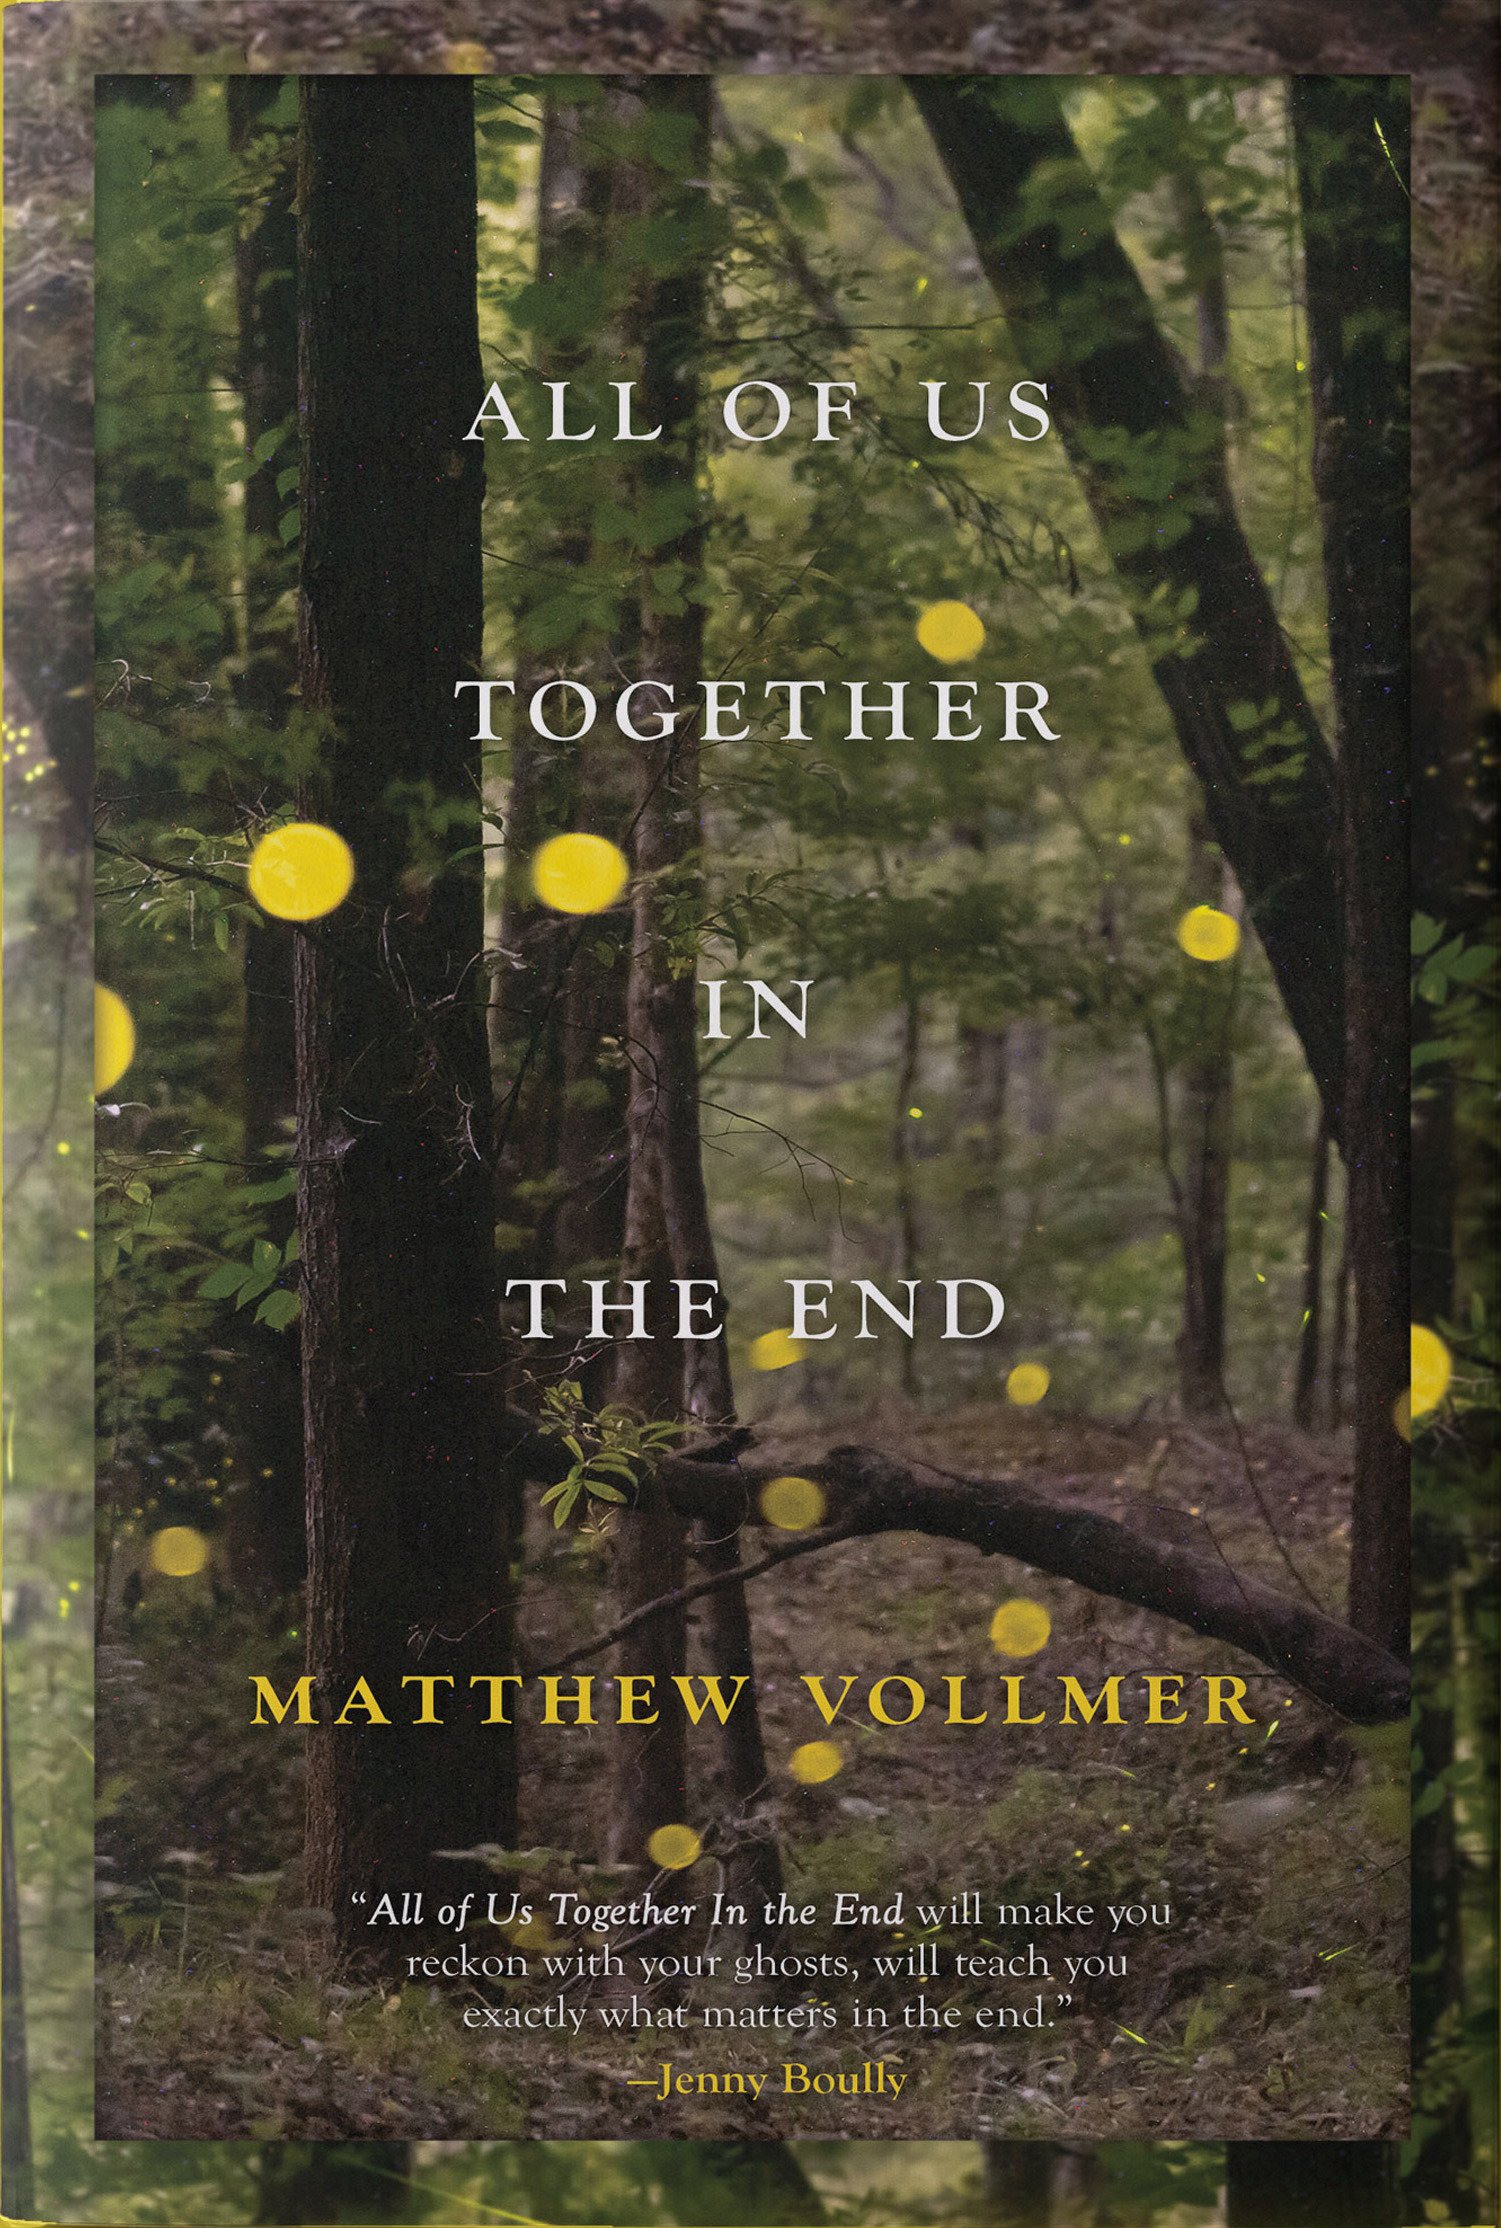 Telling People About the Lights | A Conversation with Matthew Vollmer